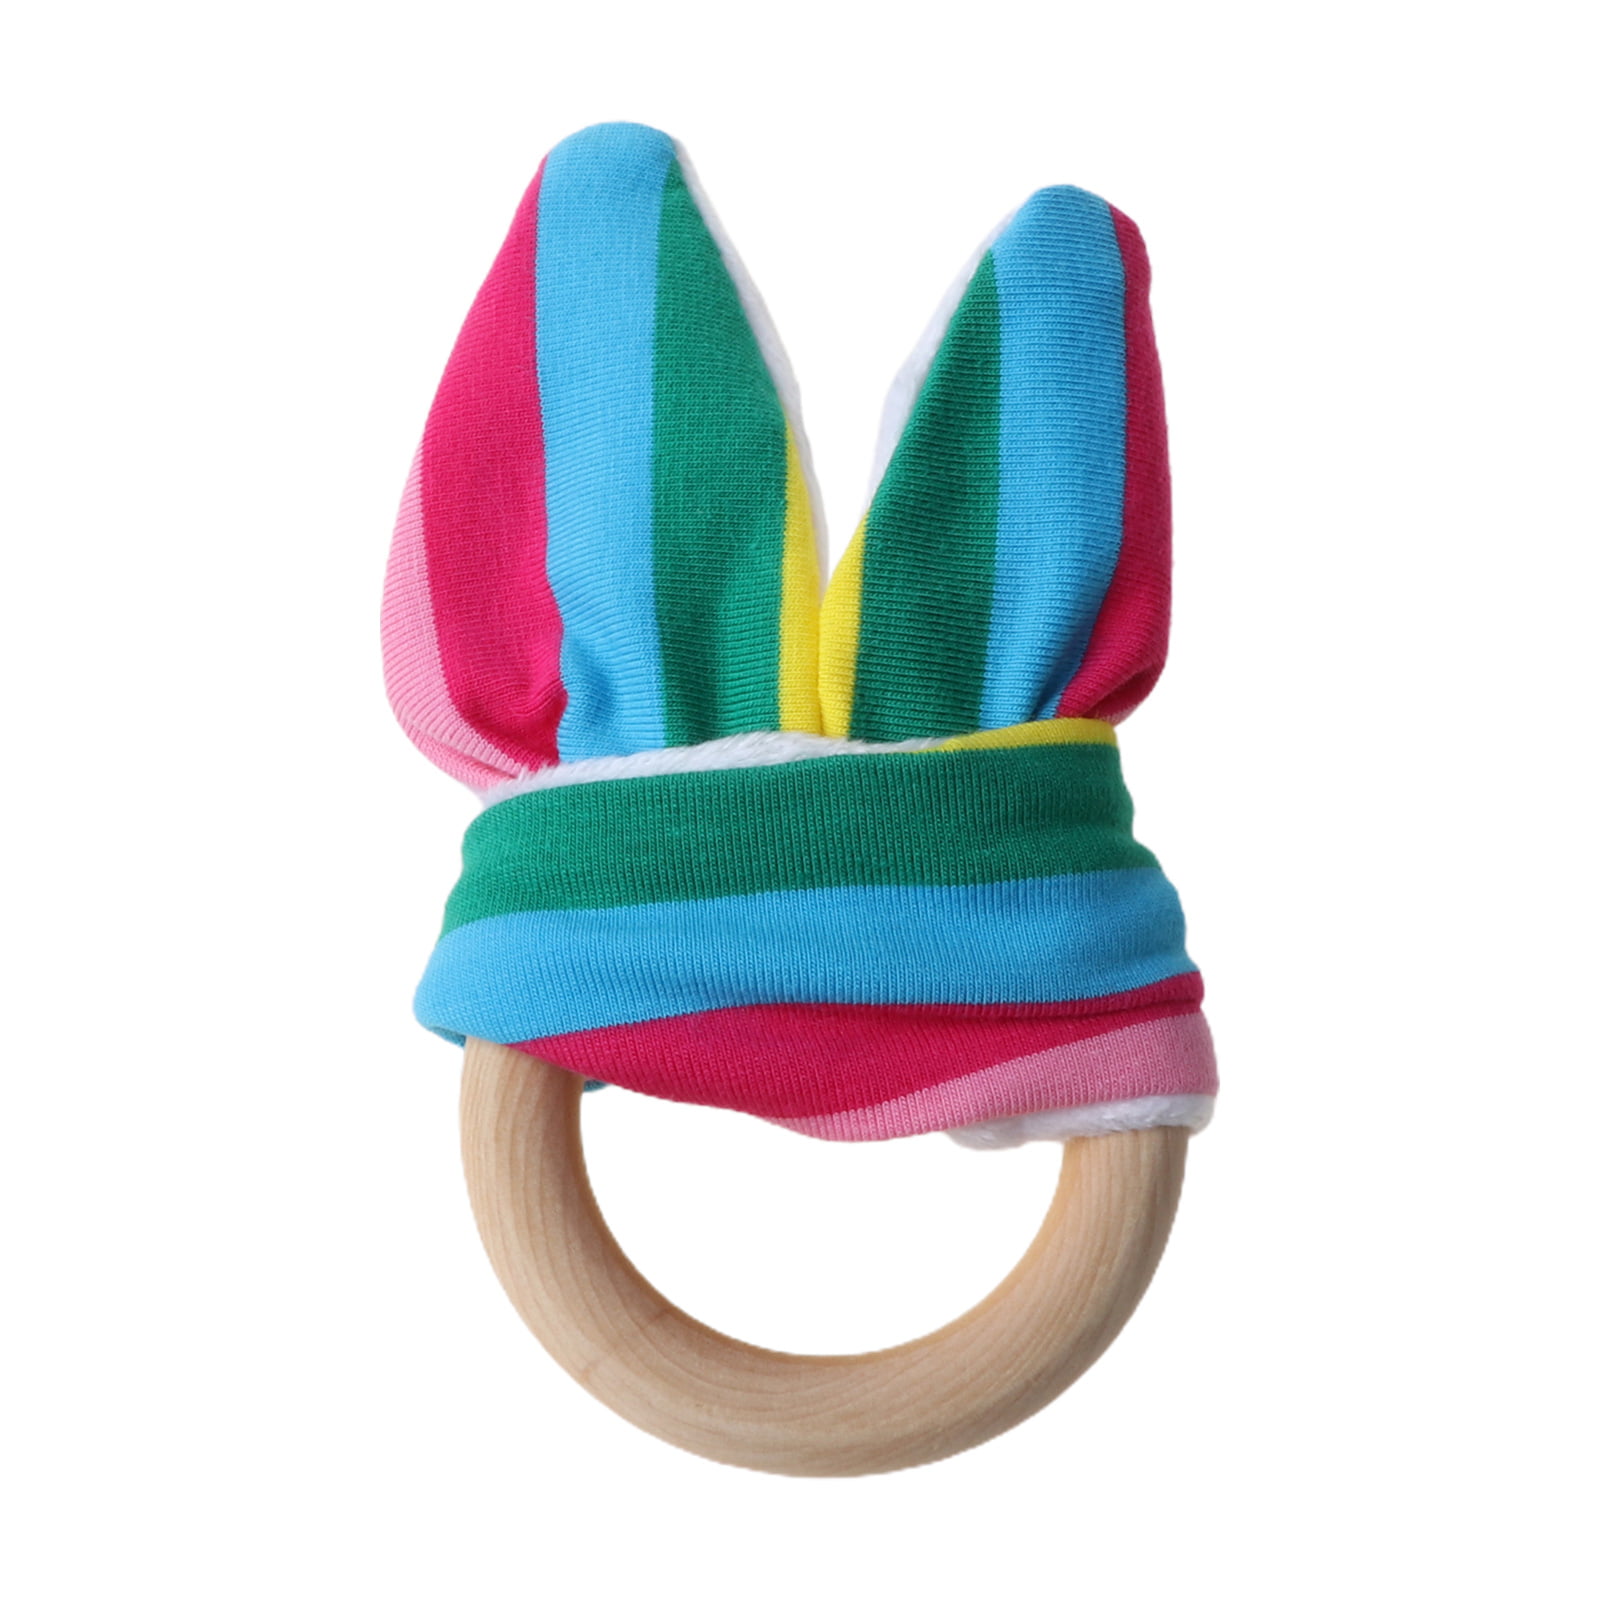 Wooden Handmade Natural Baby Teething Ring Chewie Teether Bunny Sensory Gift Toy 